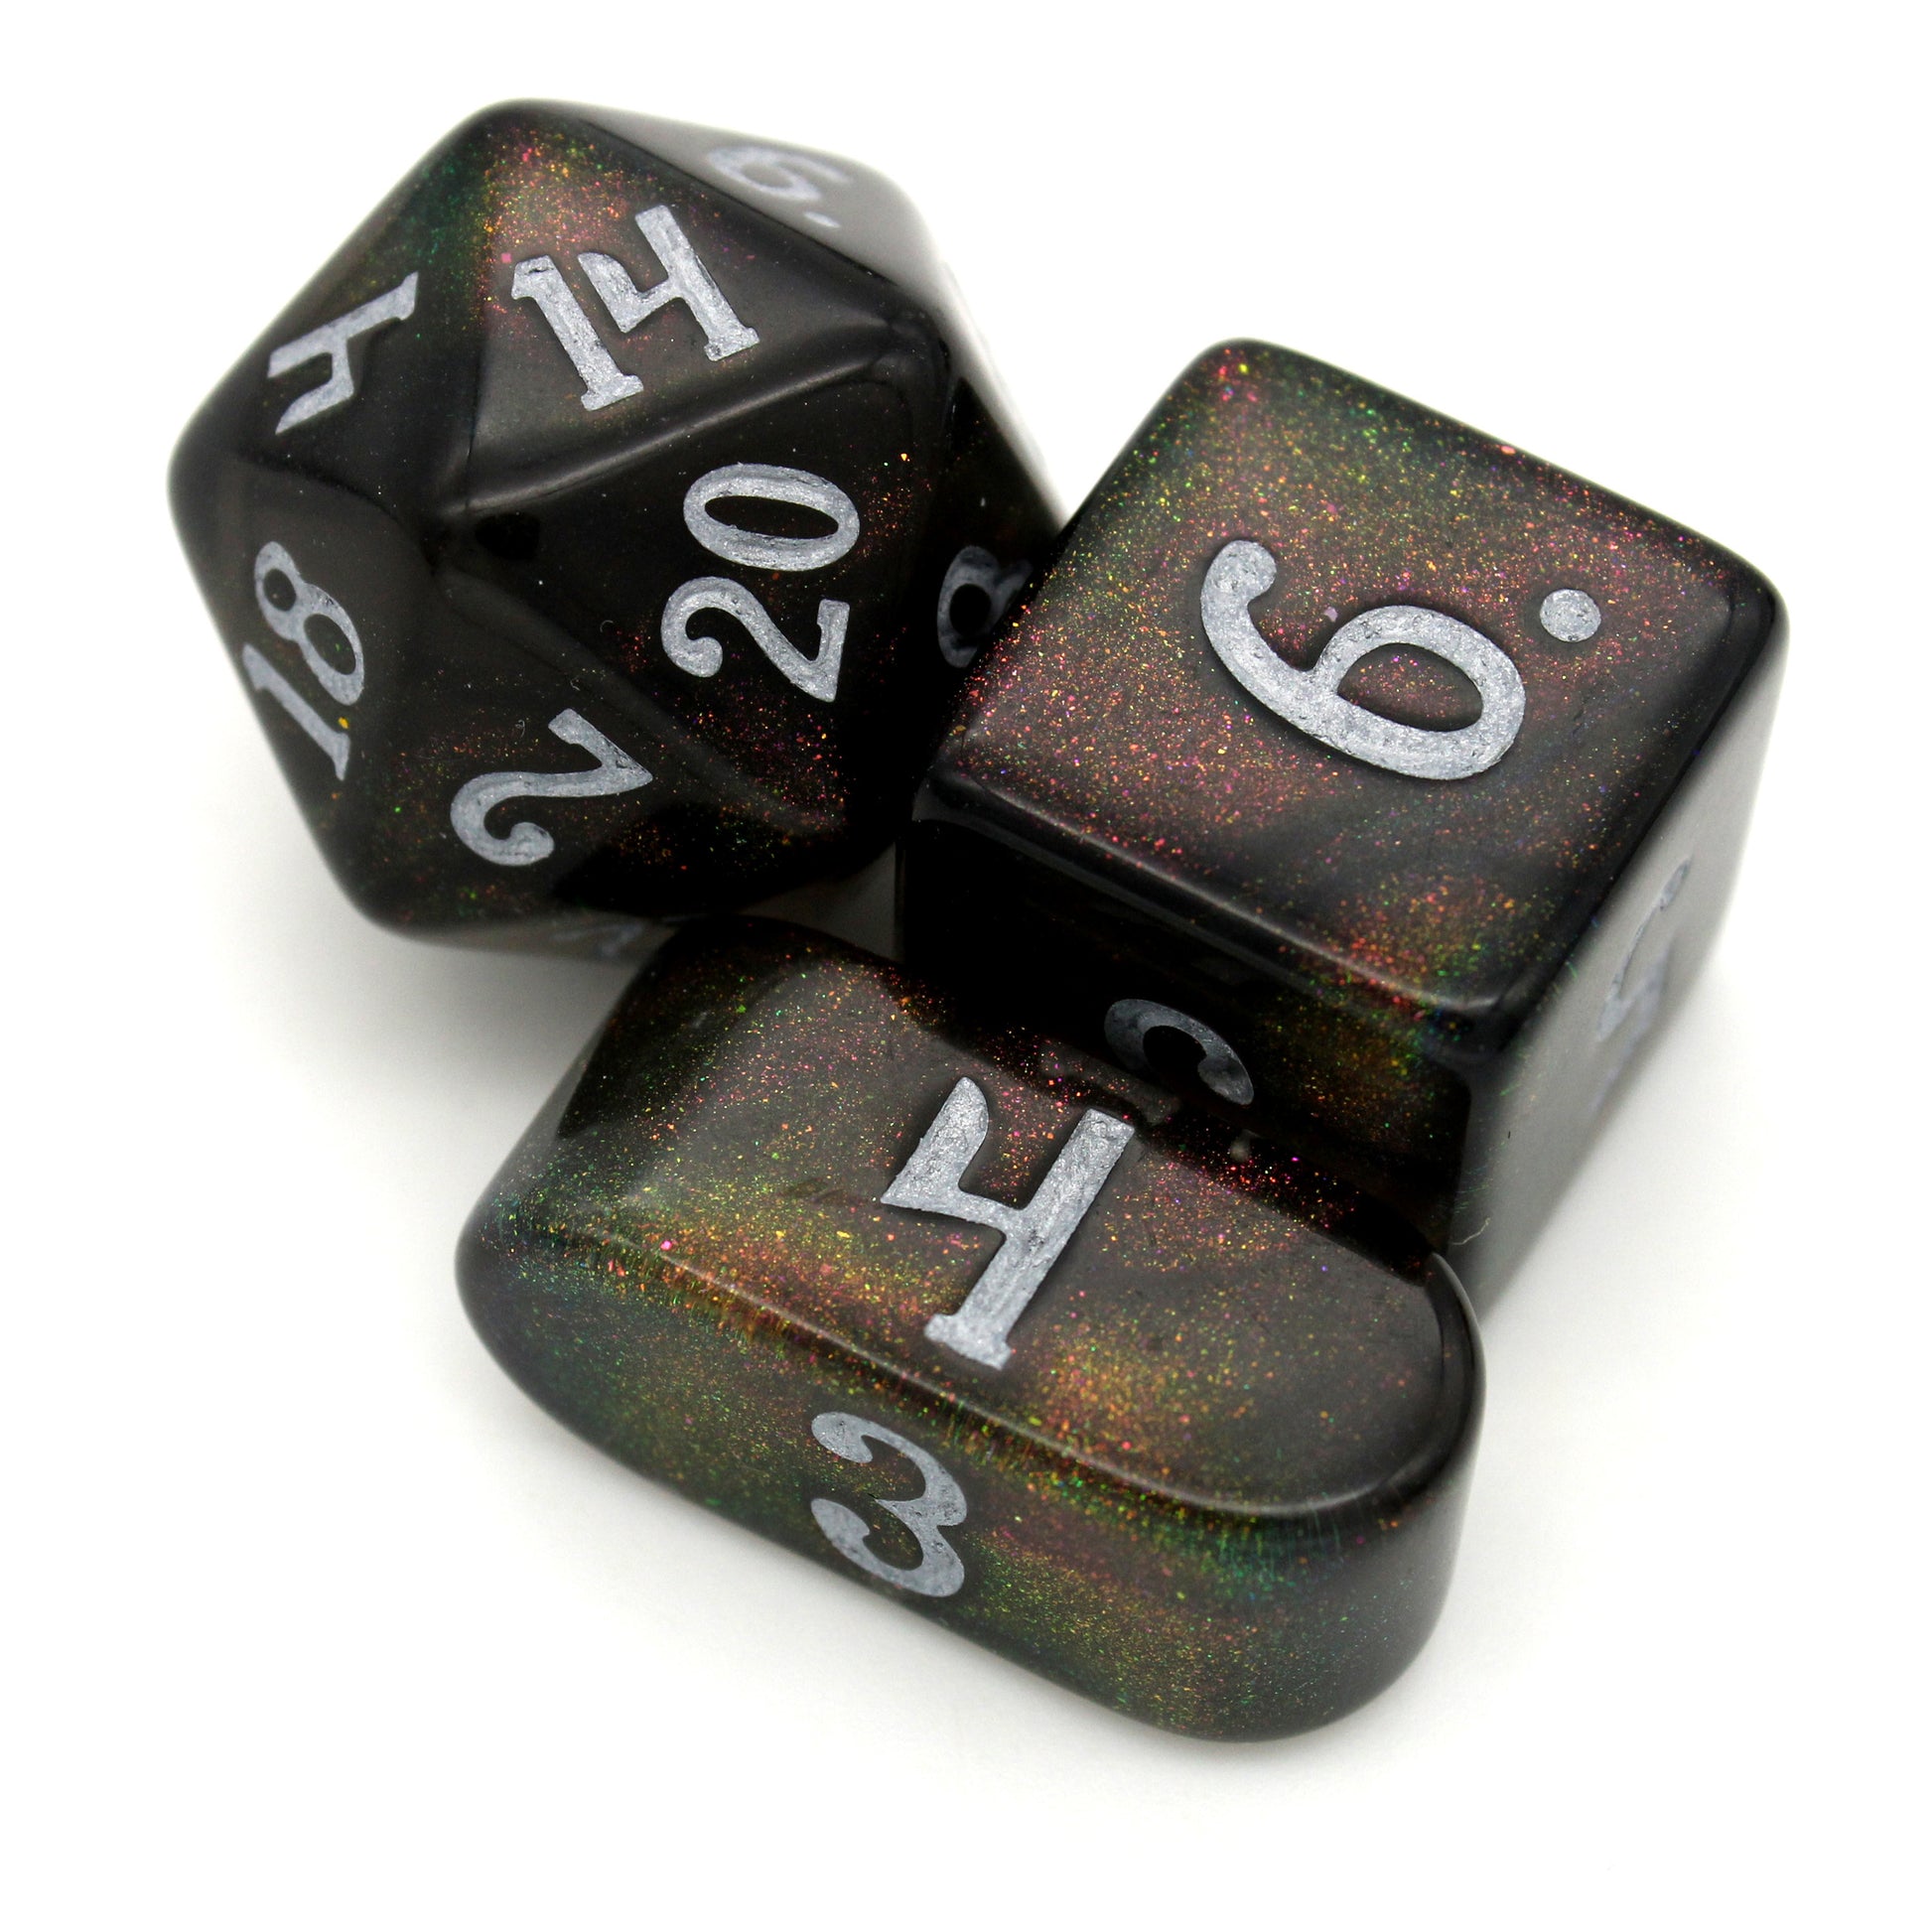 Archfeylien is a 10-piece set of acrylic dice featuring spacey, color-shifting microglitter, inked in white.